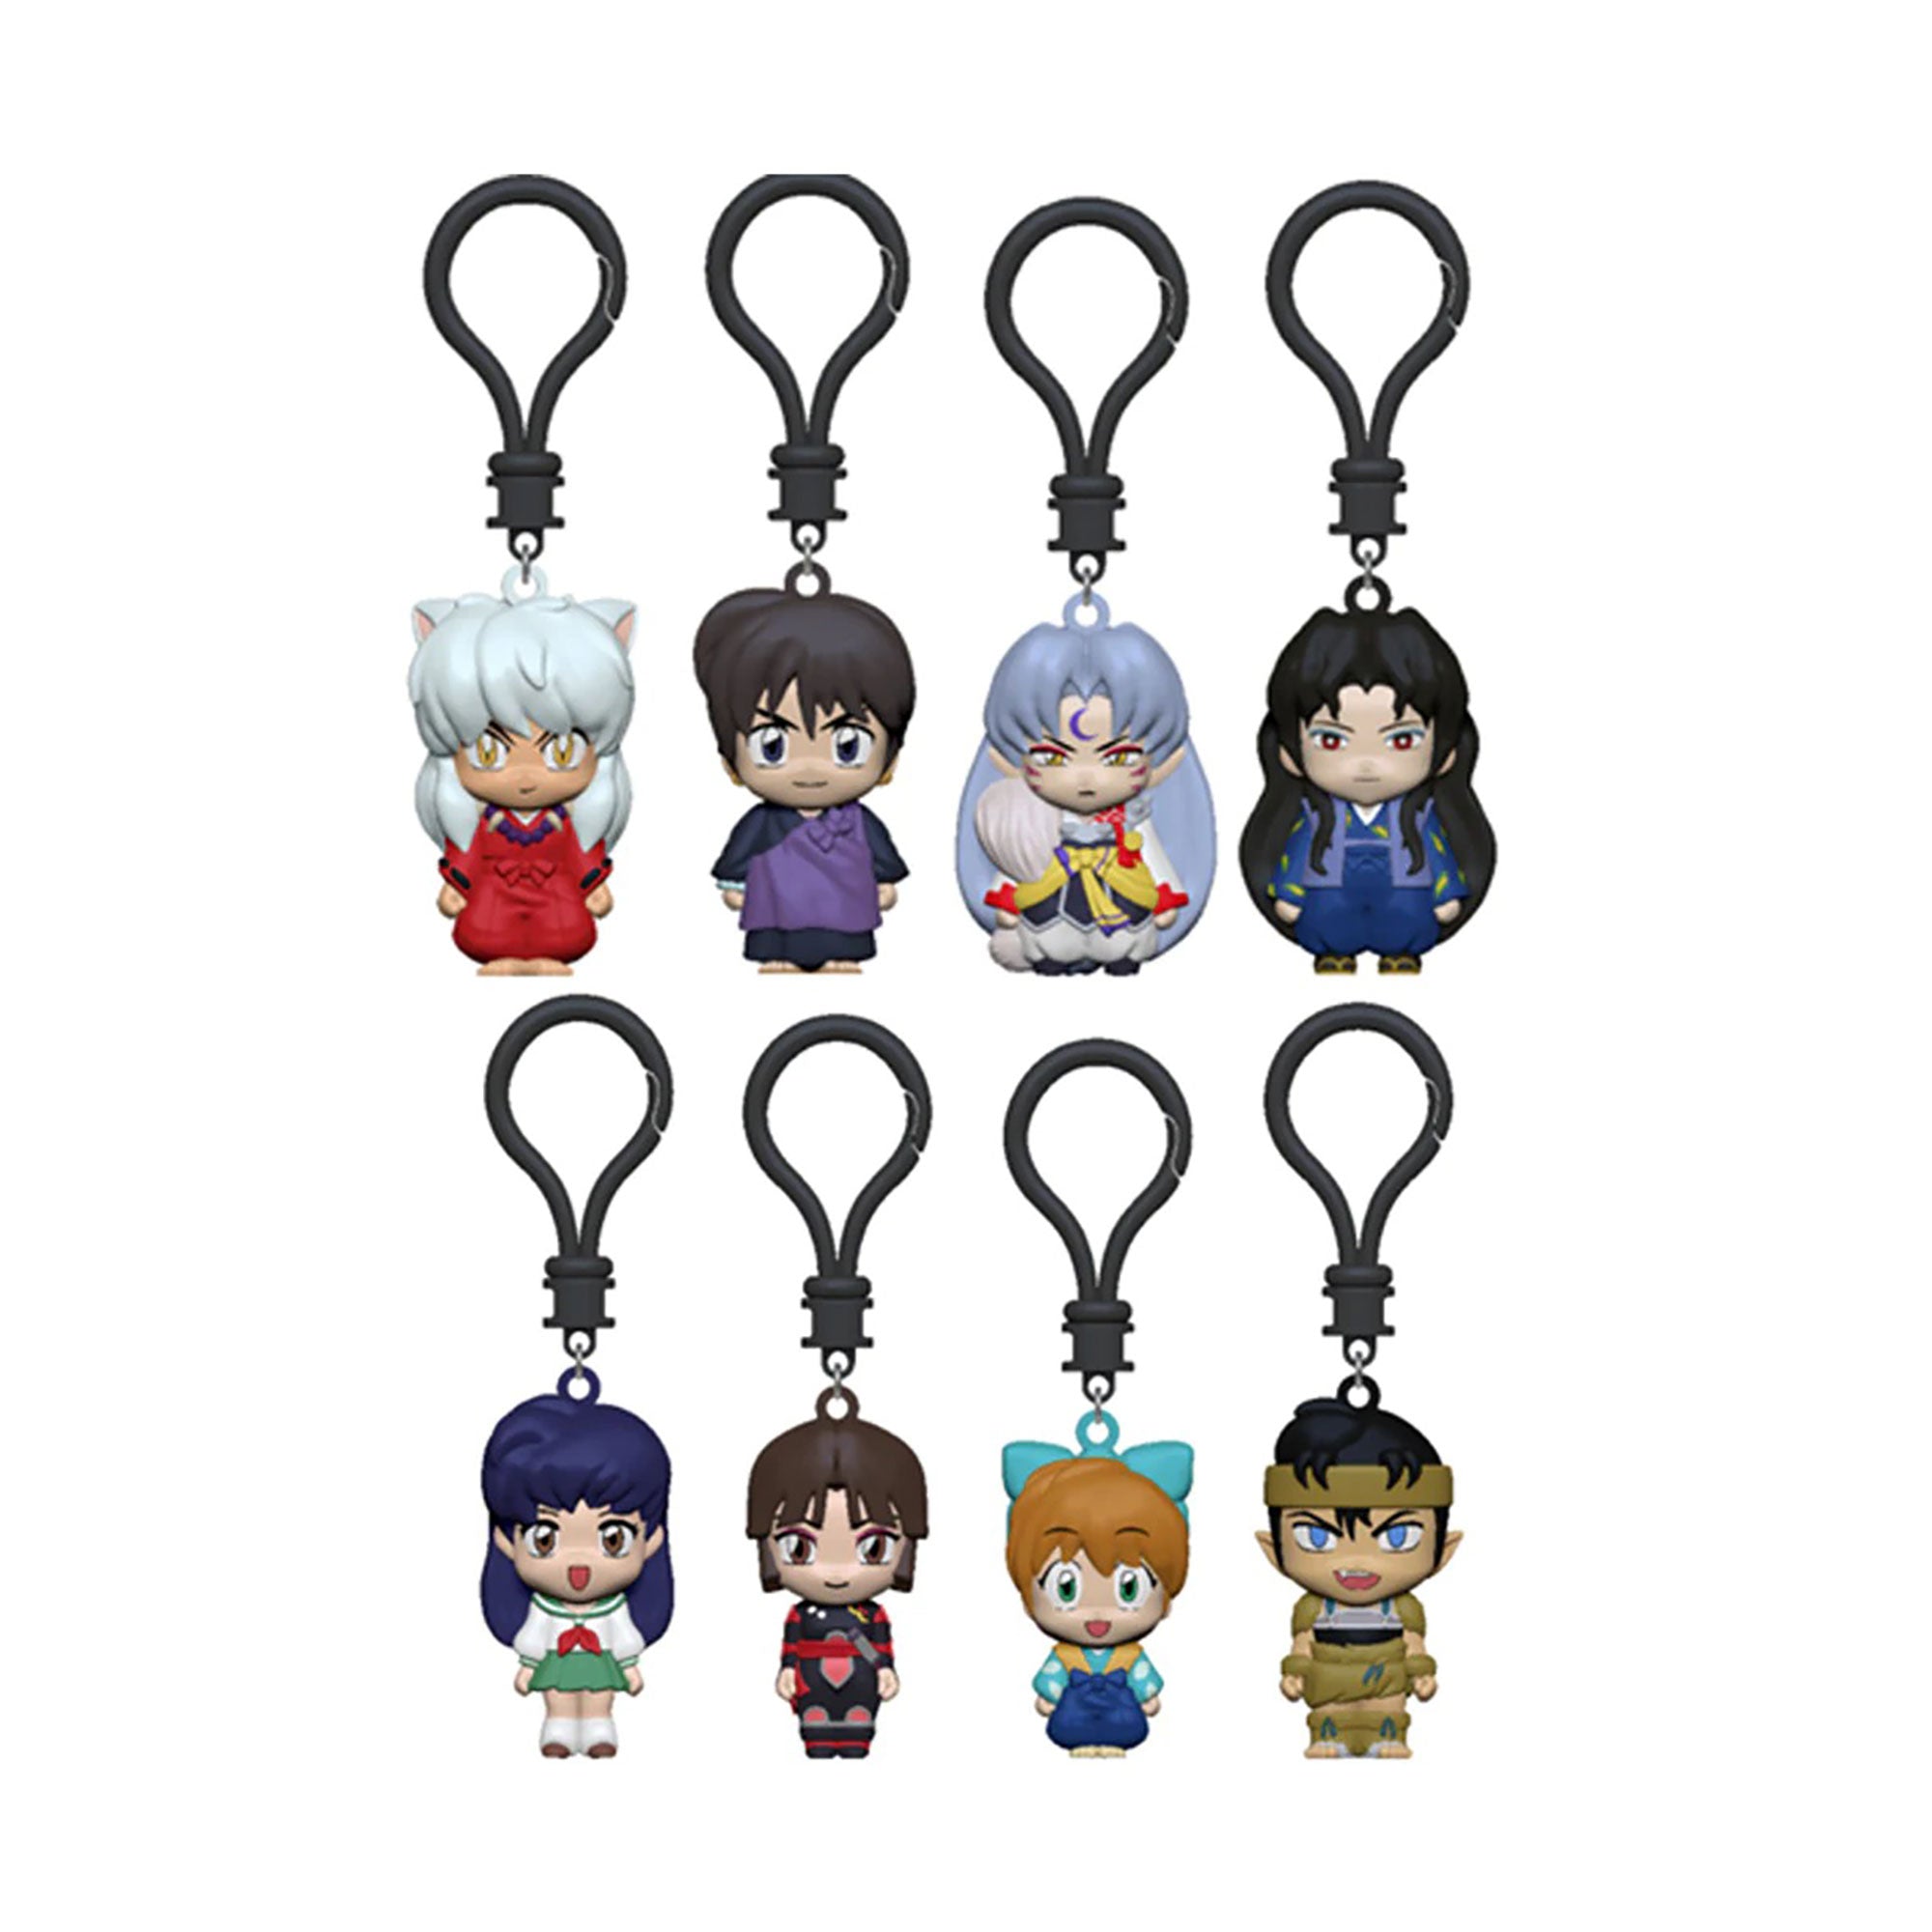 Inuyasha Mini Figures with Clip, Assortment, 1 Count